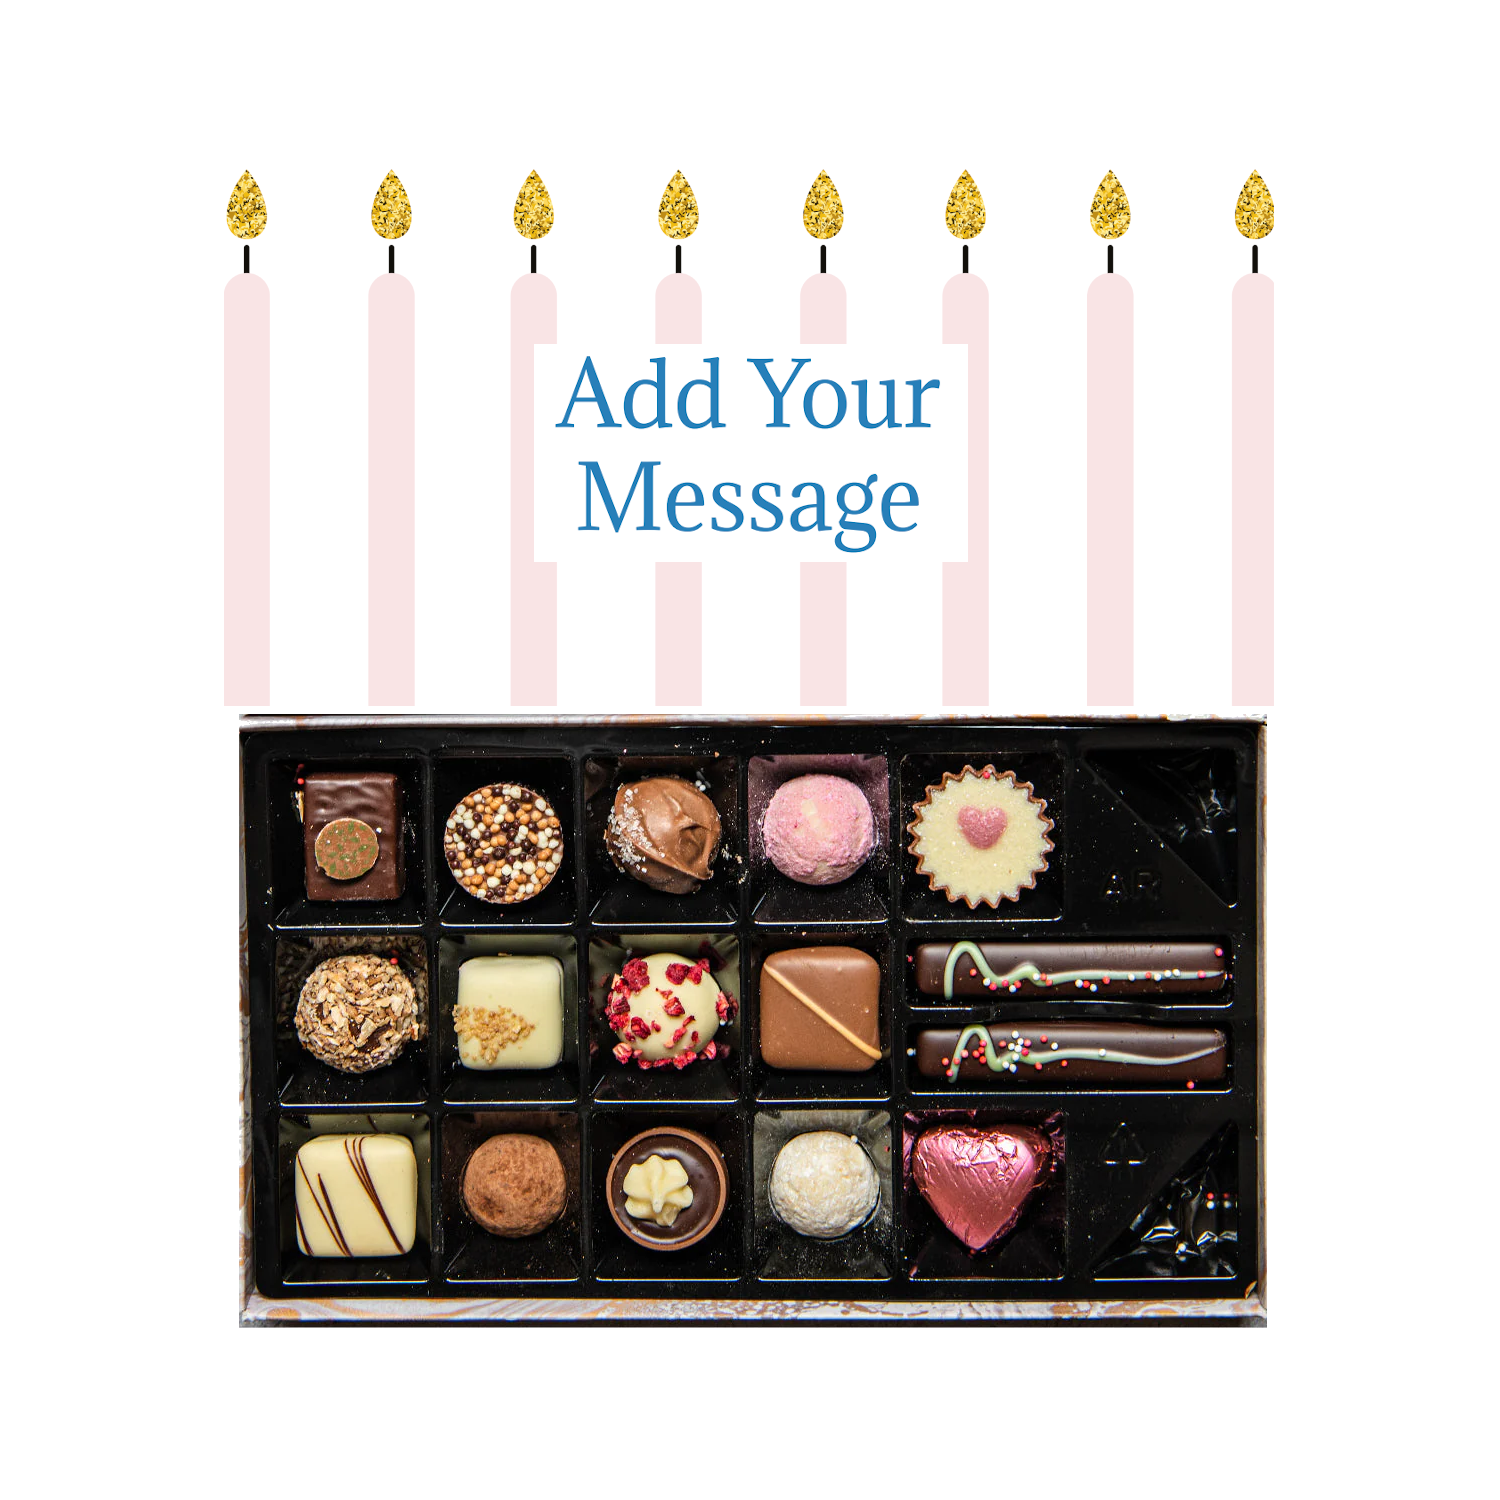 Buy Customized Logo Chocolate Wrapper with Diwali Greeting Message 12  Chocolate Combo Gift Set - For Employees, Dealers, Customers, Stakeholders,  Personal or Corporate Diwali Gifting online - The Gifting Marketplace